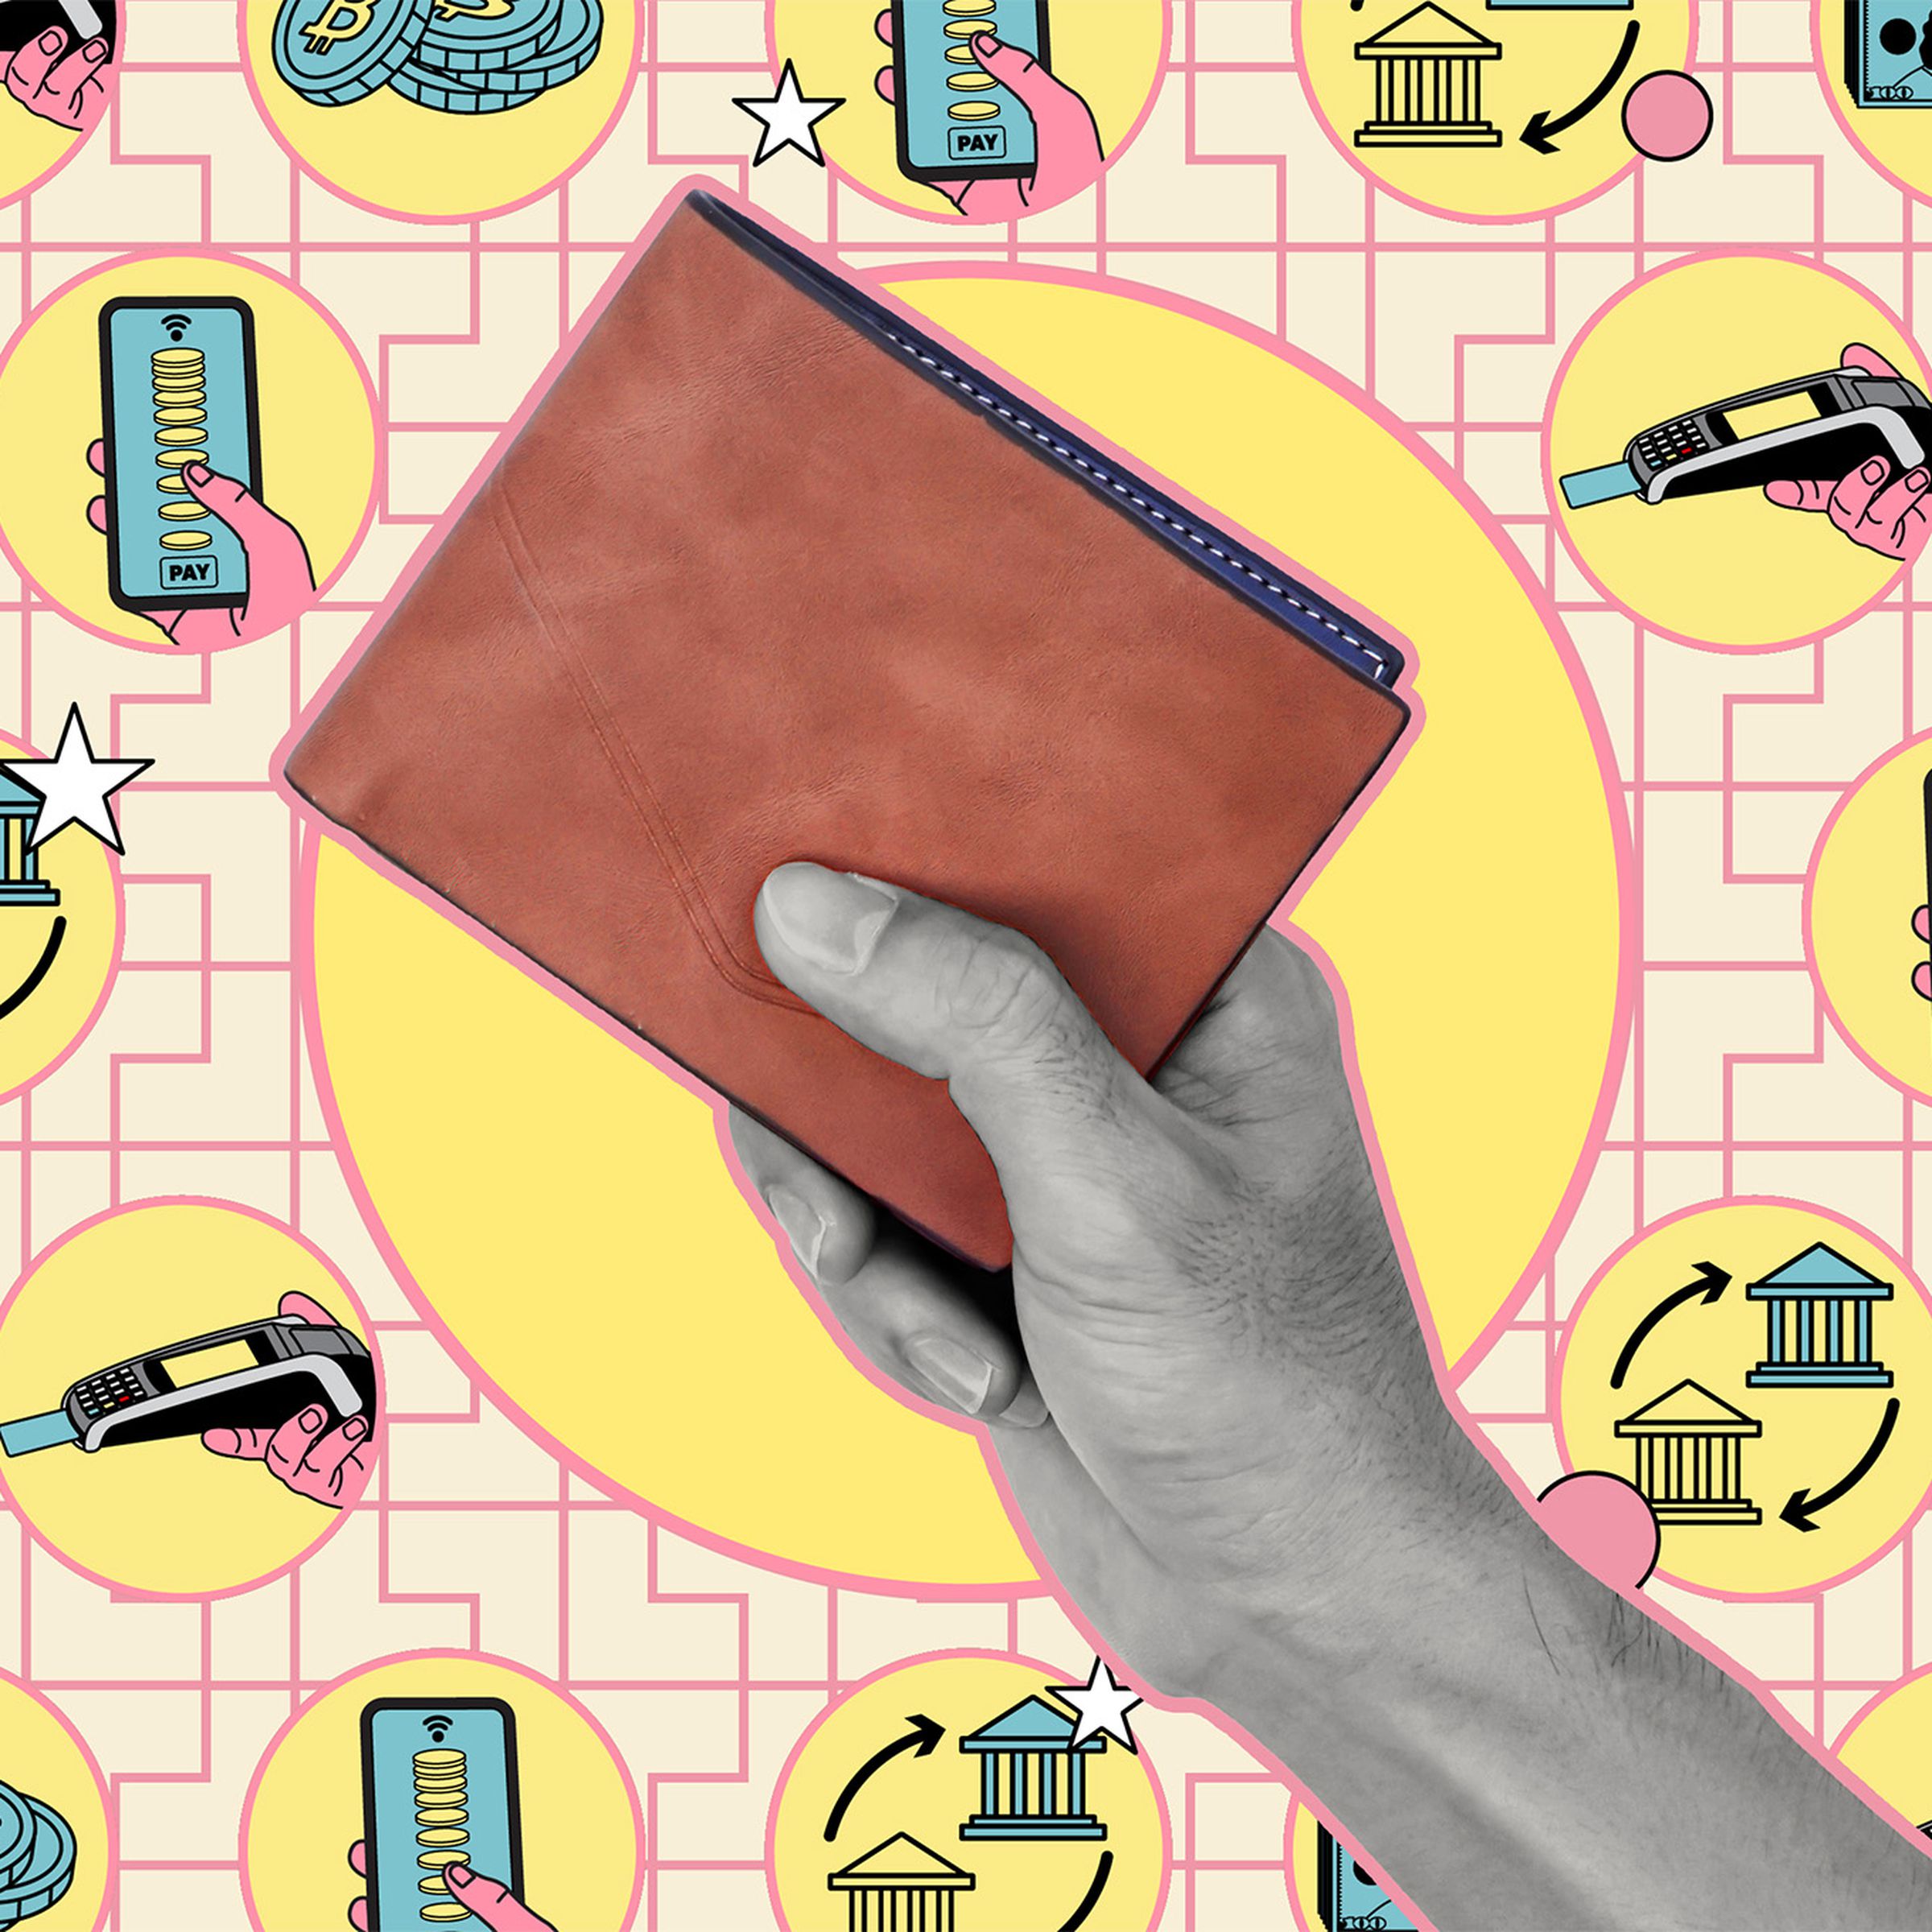 An illustration of a hand holding up a wallet in front of a yellow background filled with money-related icons.